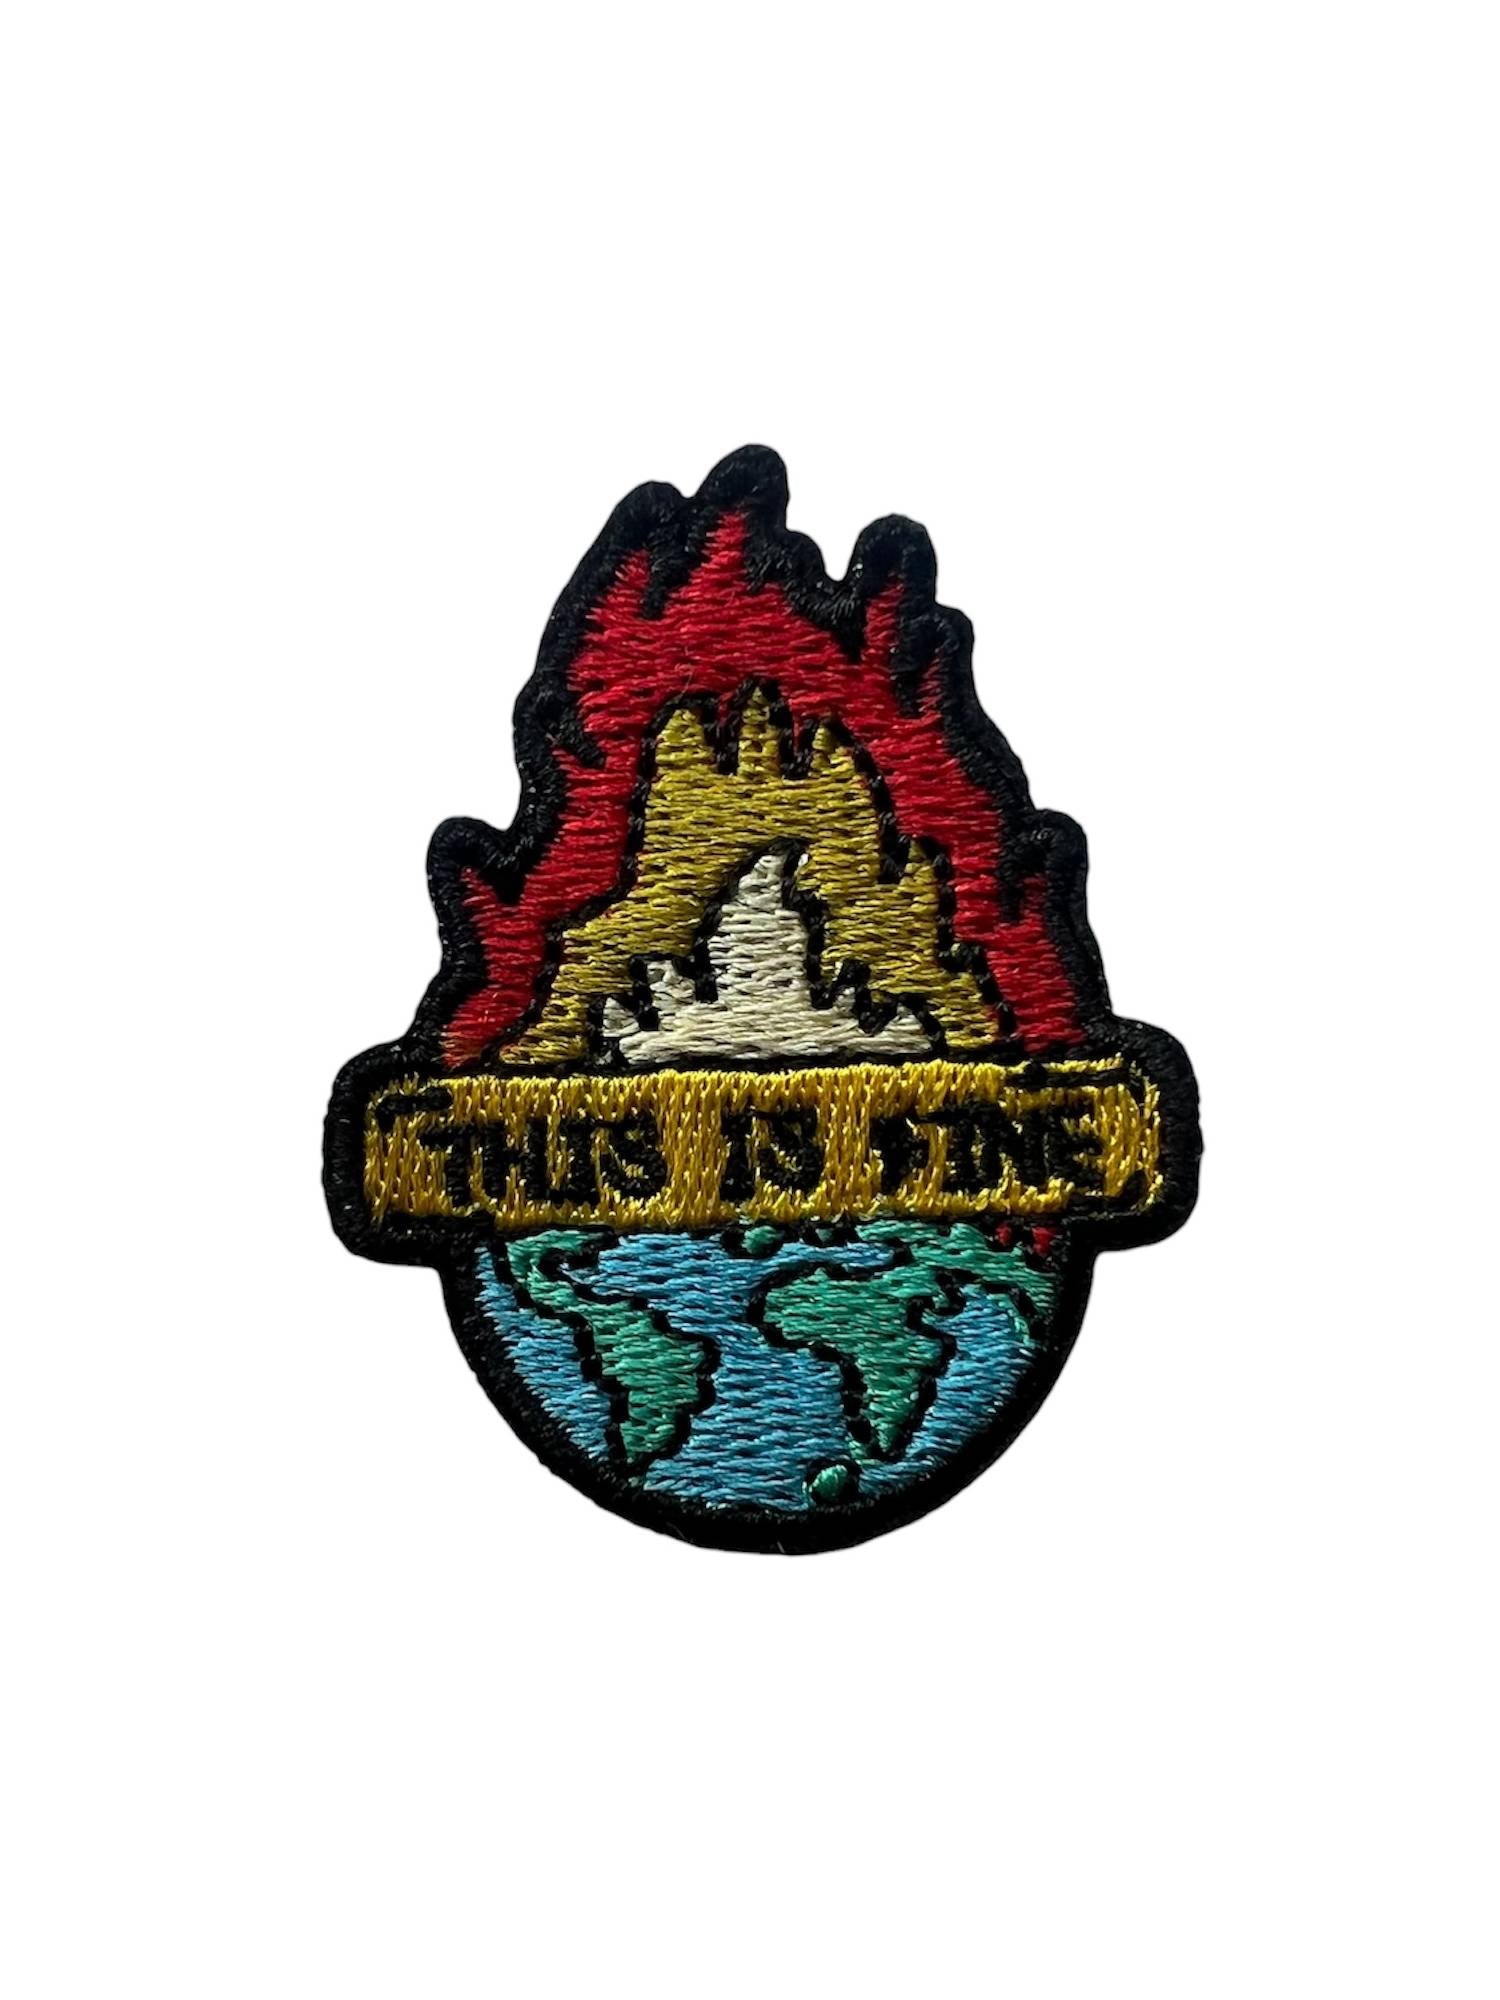 Activist iron-on embroidery "This is fine" featuring earth on fire 